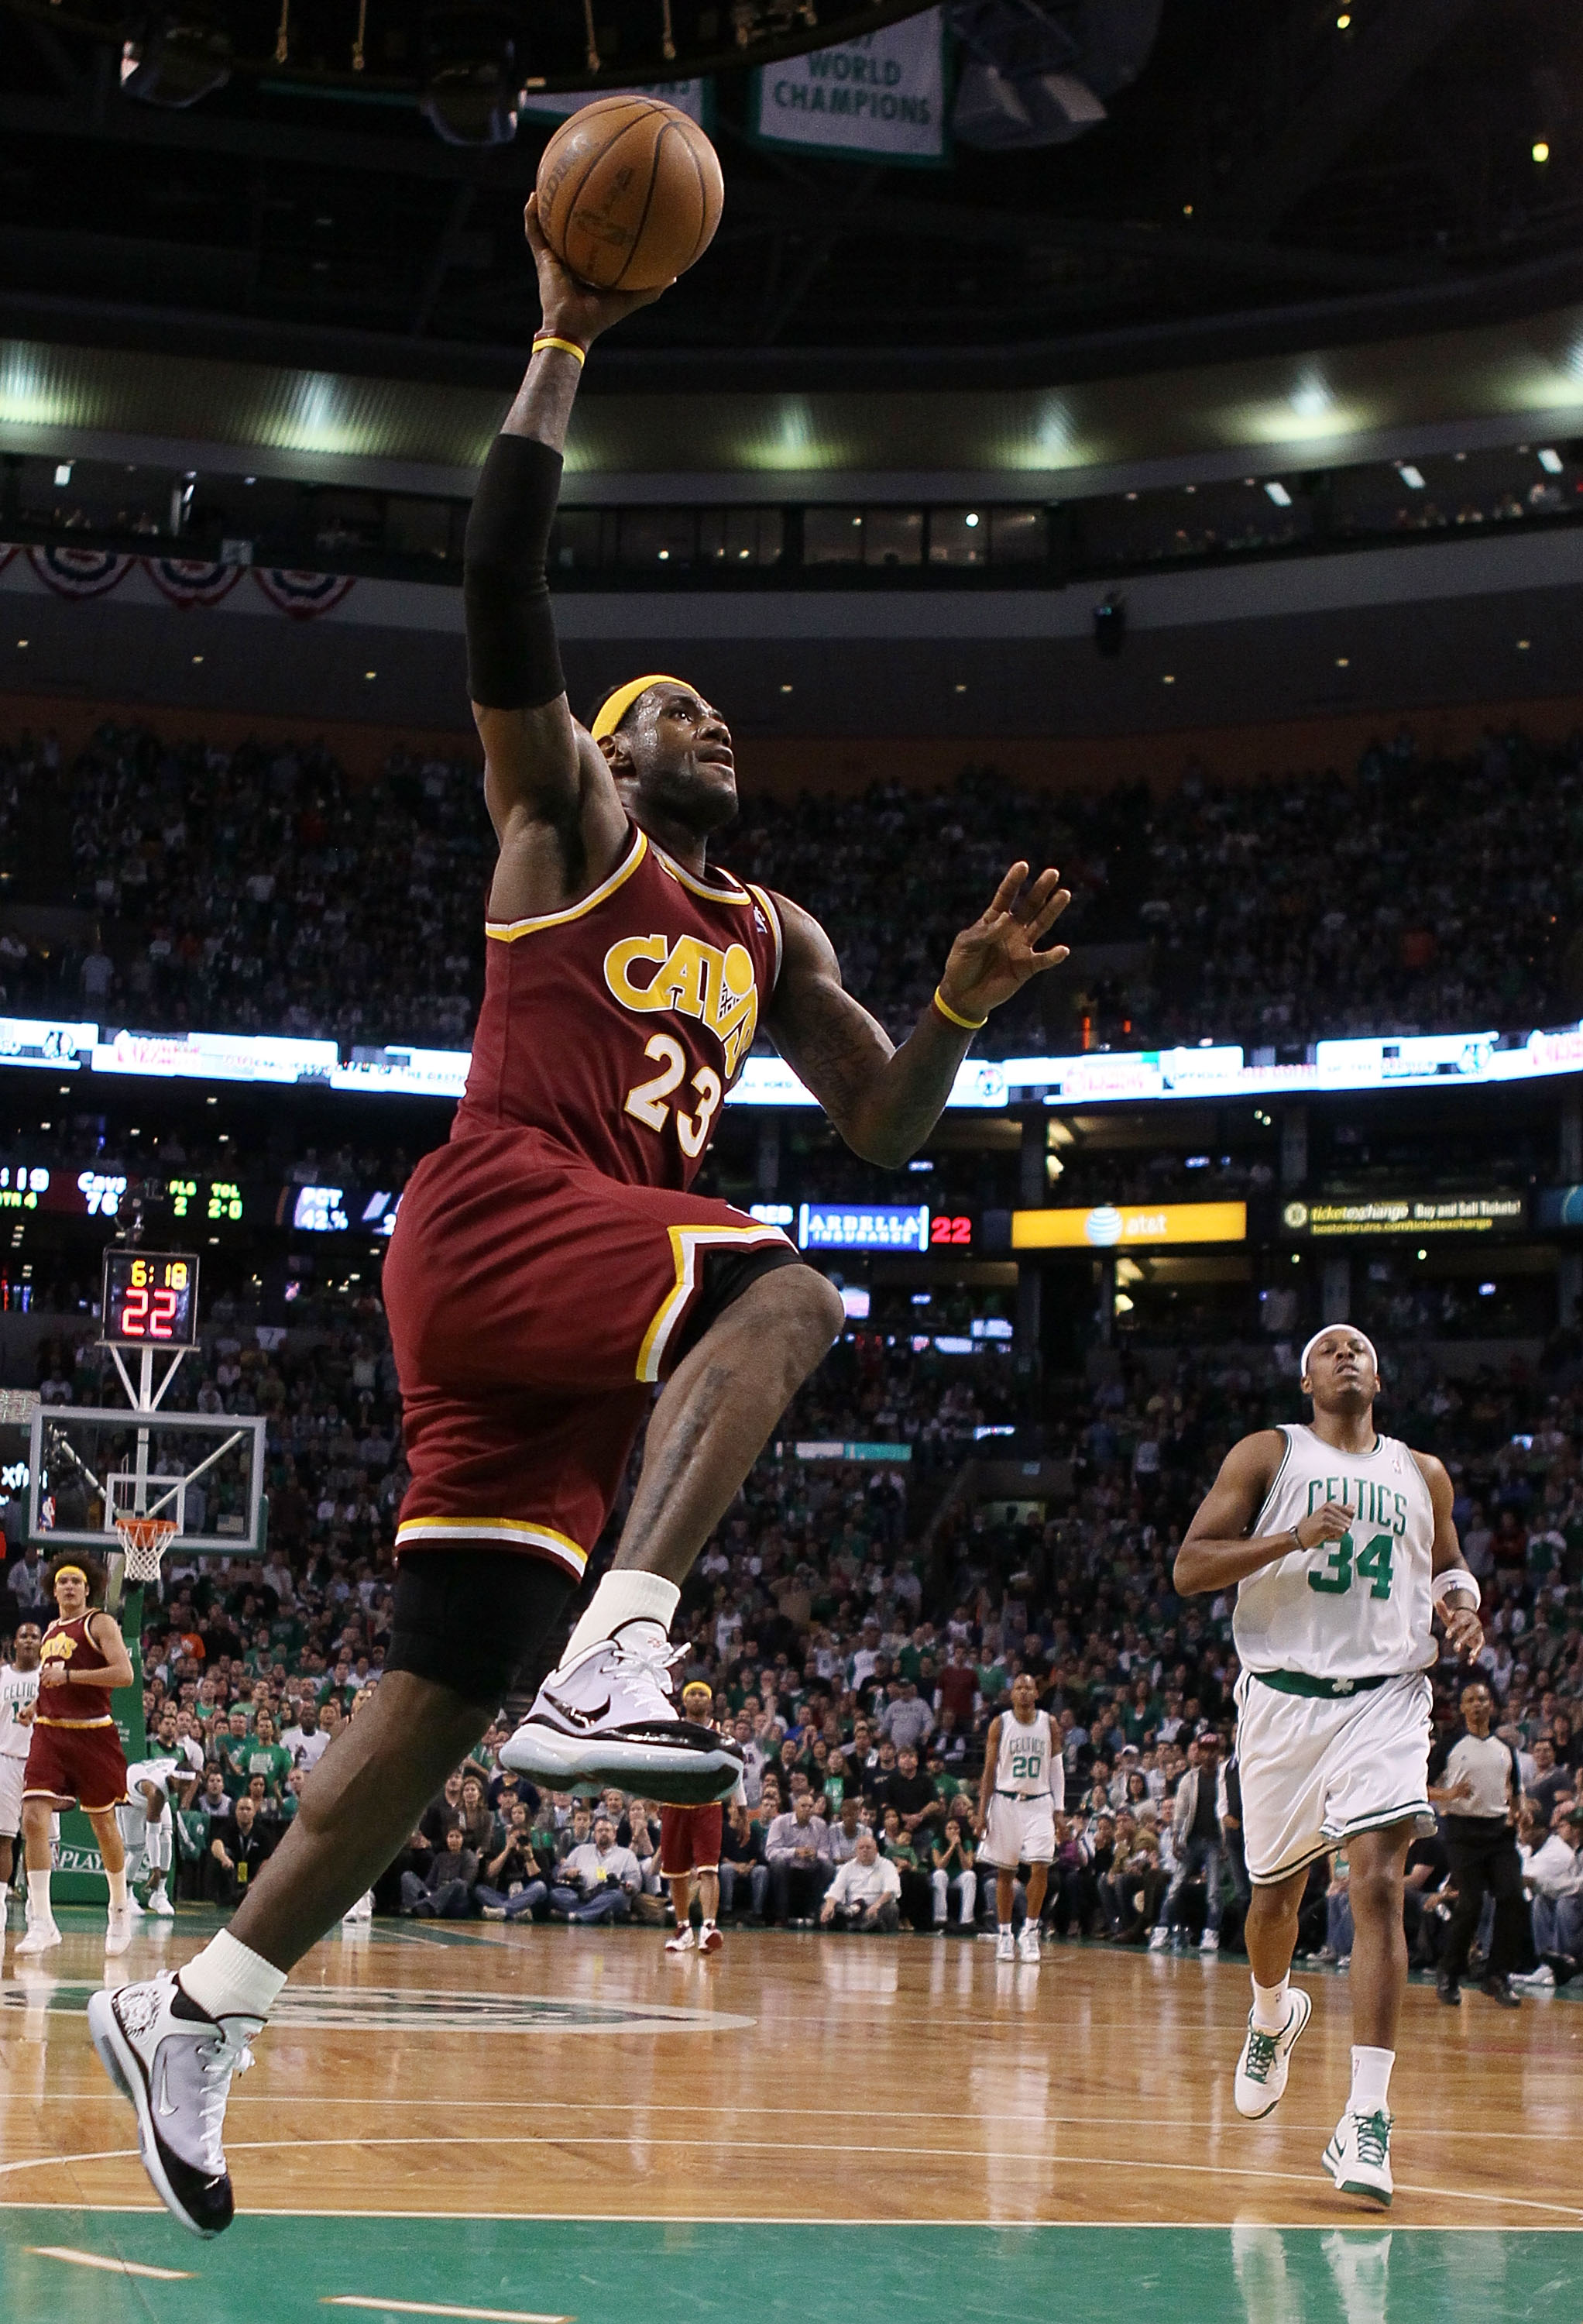 BOSTON - MAY 09:  LeBron James #23 of the Cleveland Cavaliers has a break away basket as Paul Pierce #34 of the Boston Celtics defends during Game Four of the Eastern Conference Semifinals of the 2010 NBA playoffs at TD Garden on May 9, 2010 in Boston, Ma